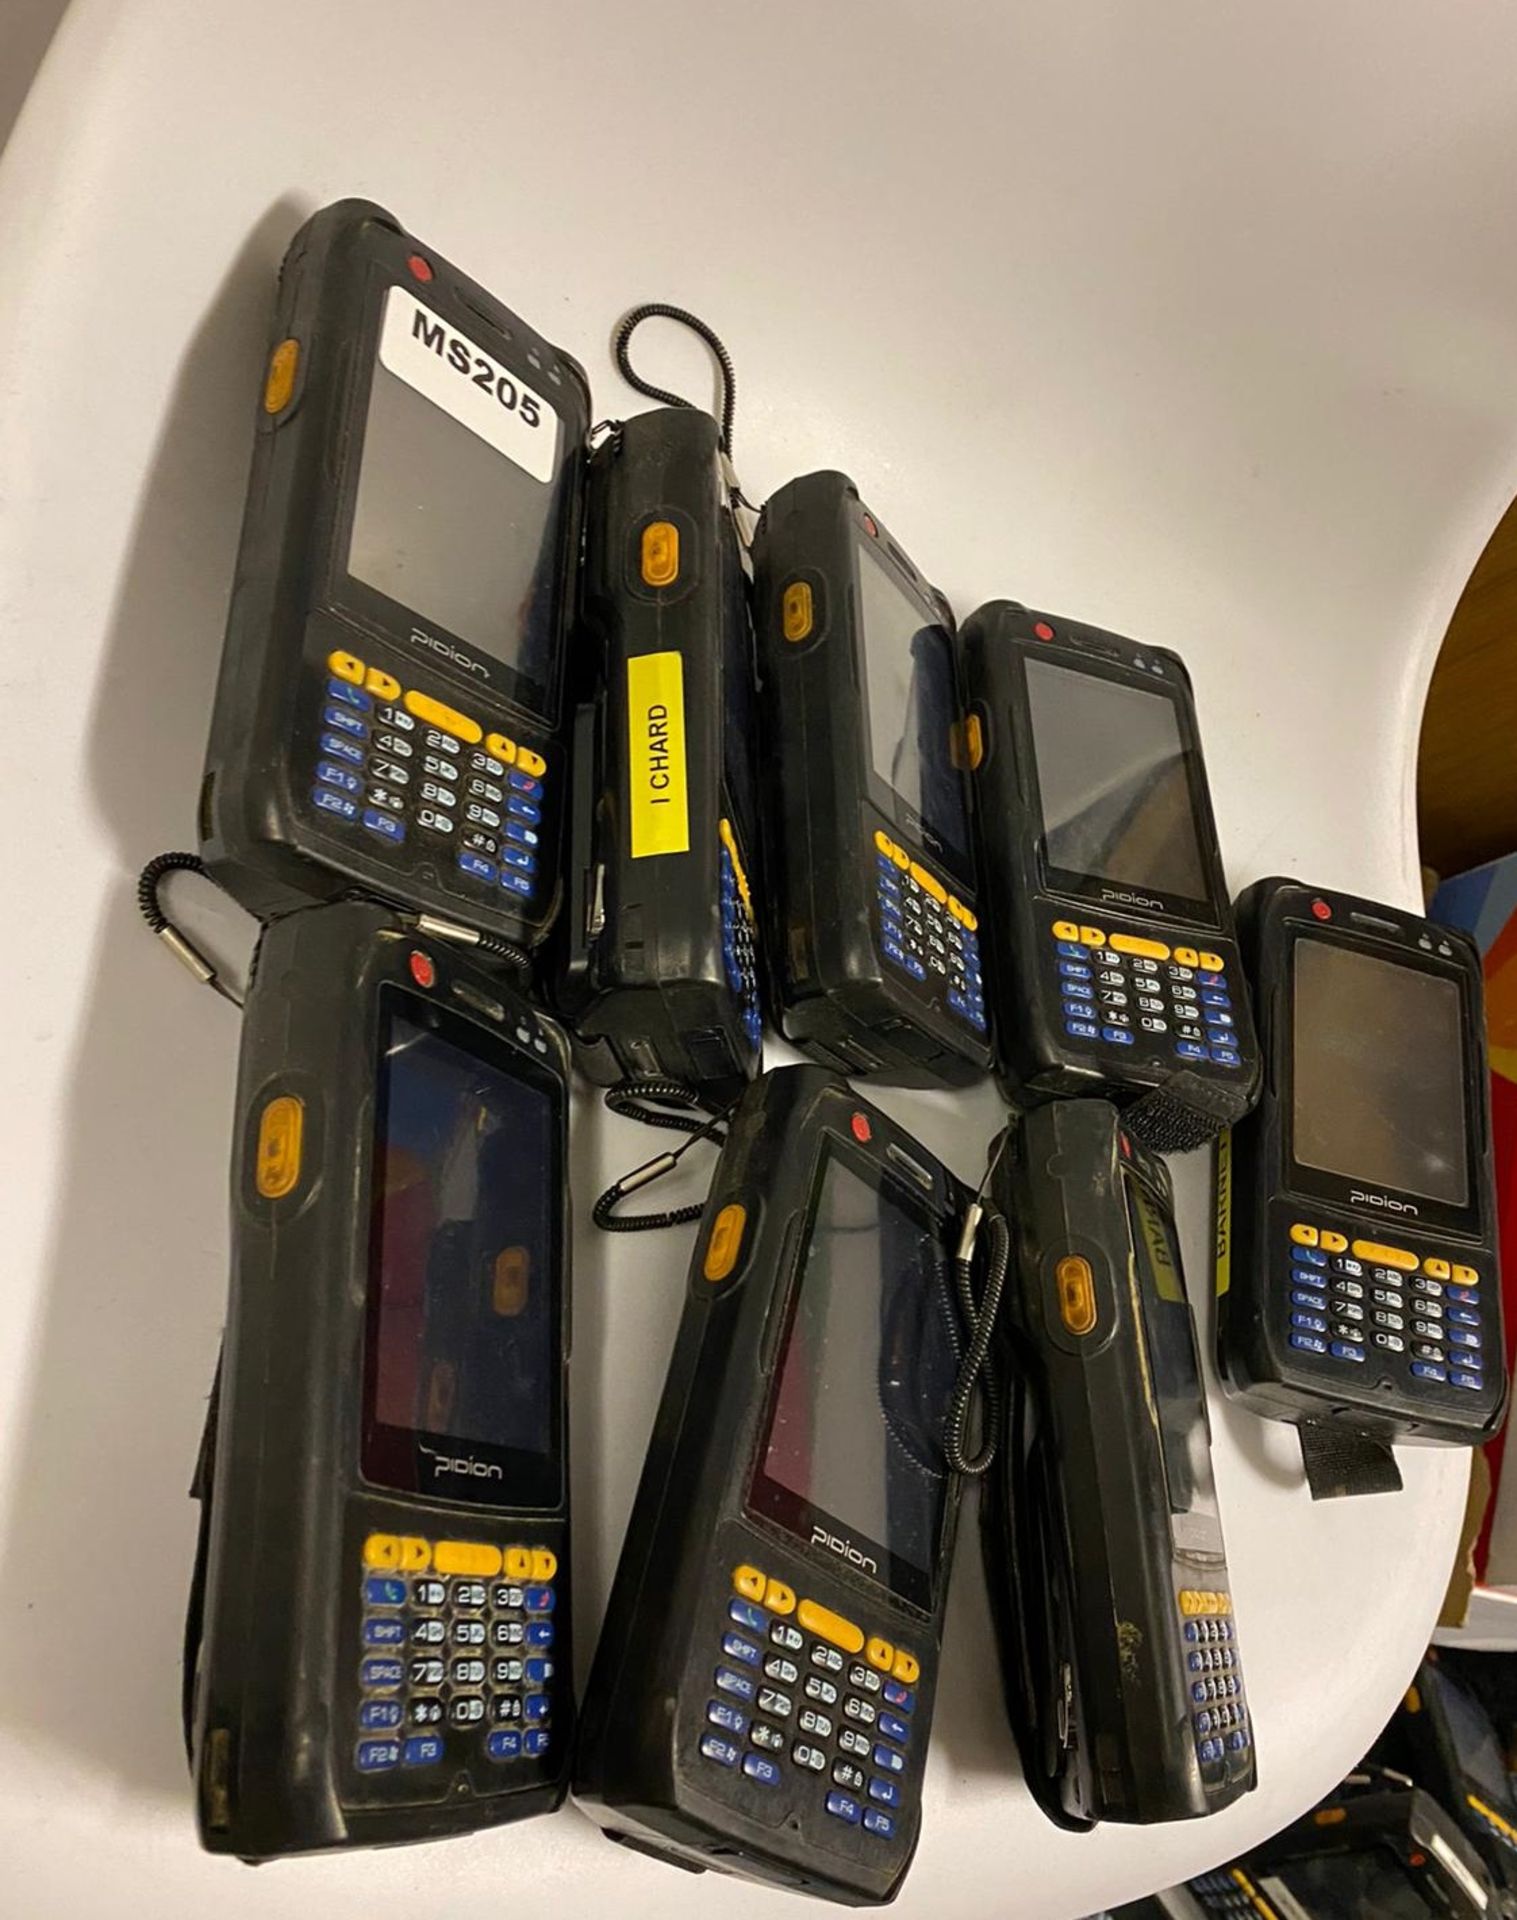 8 x Pidion BIP-6000 Handheld Mobile Computer With Barcode Scanning Capability - Used Condition - - Image 4 of 5